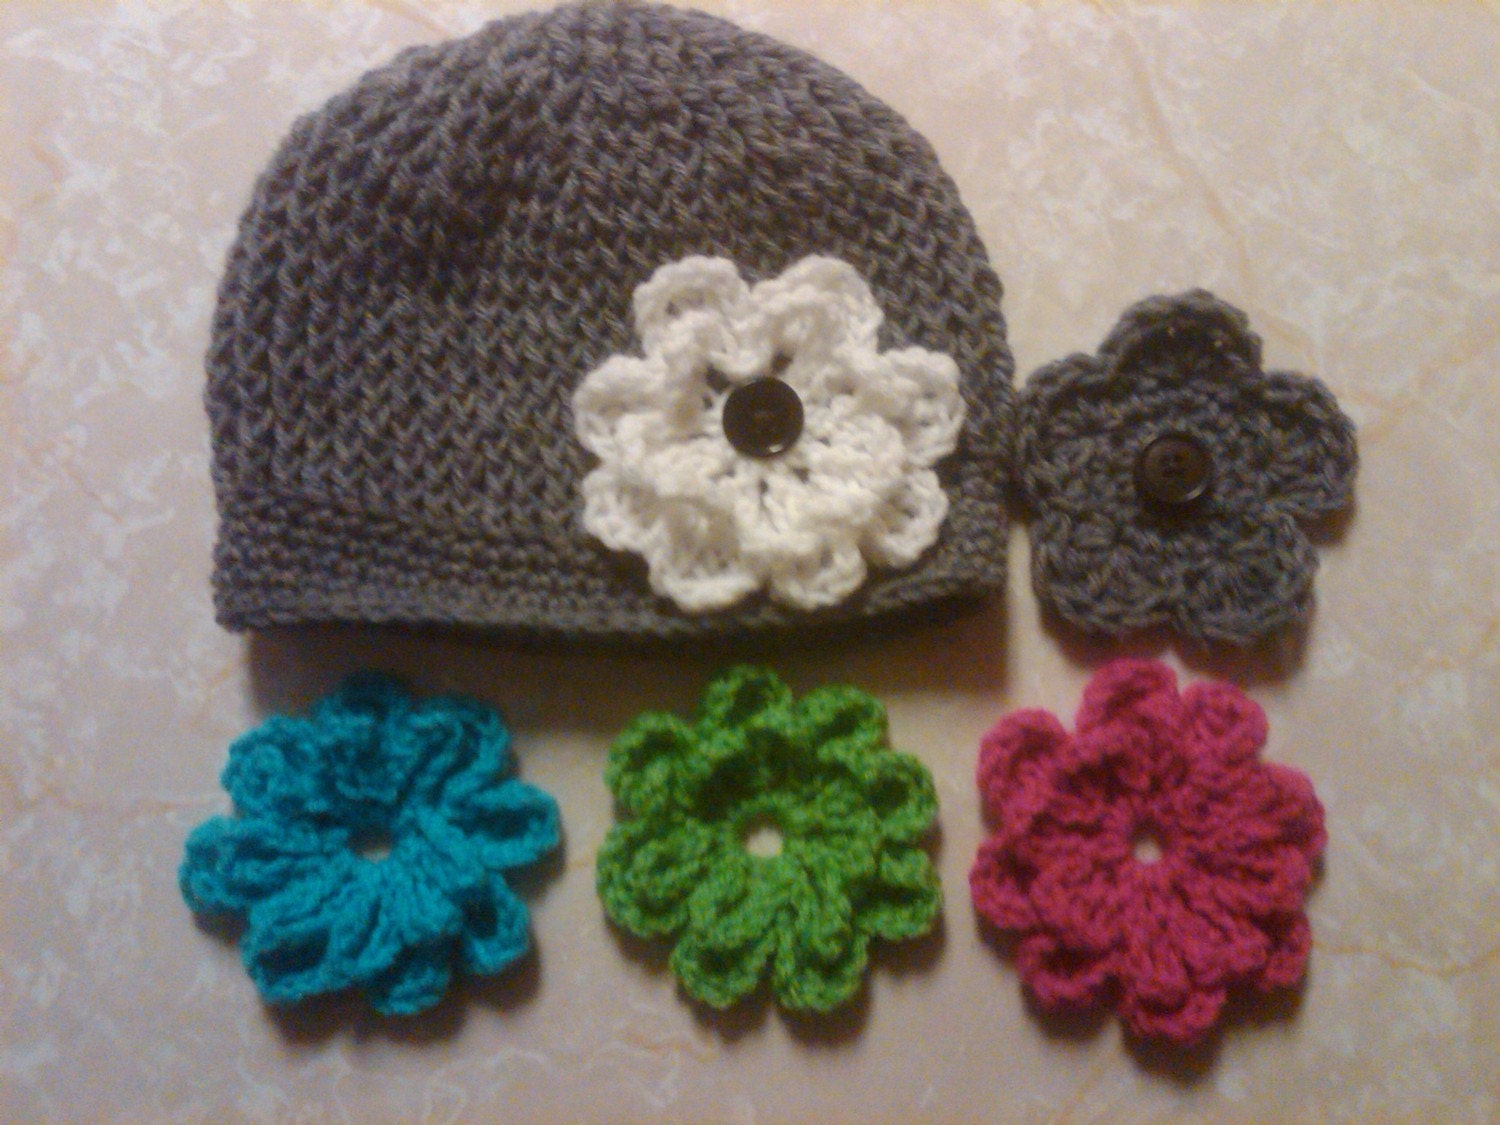 crocheted hat and hair clip with interchangeable flowers for newborns toddlers teens adult...free shipping